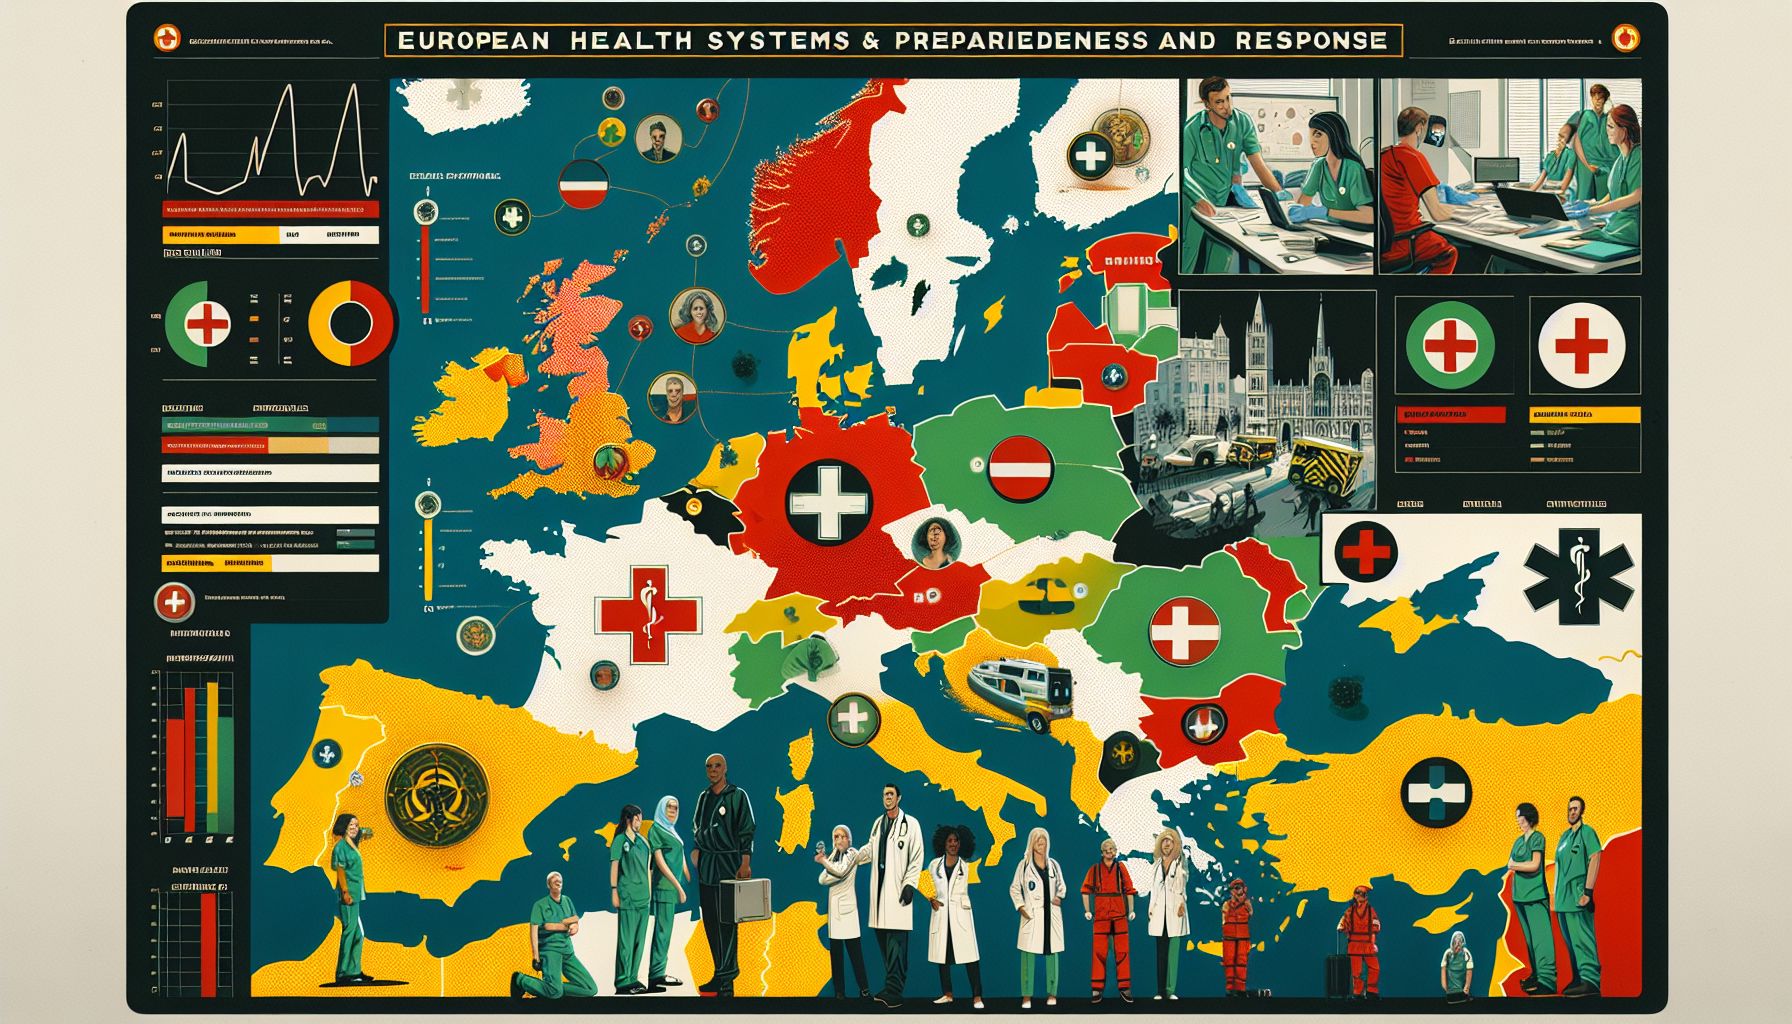 Ensuring the Preparedness and Response of European Health Systems